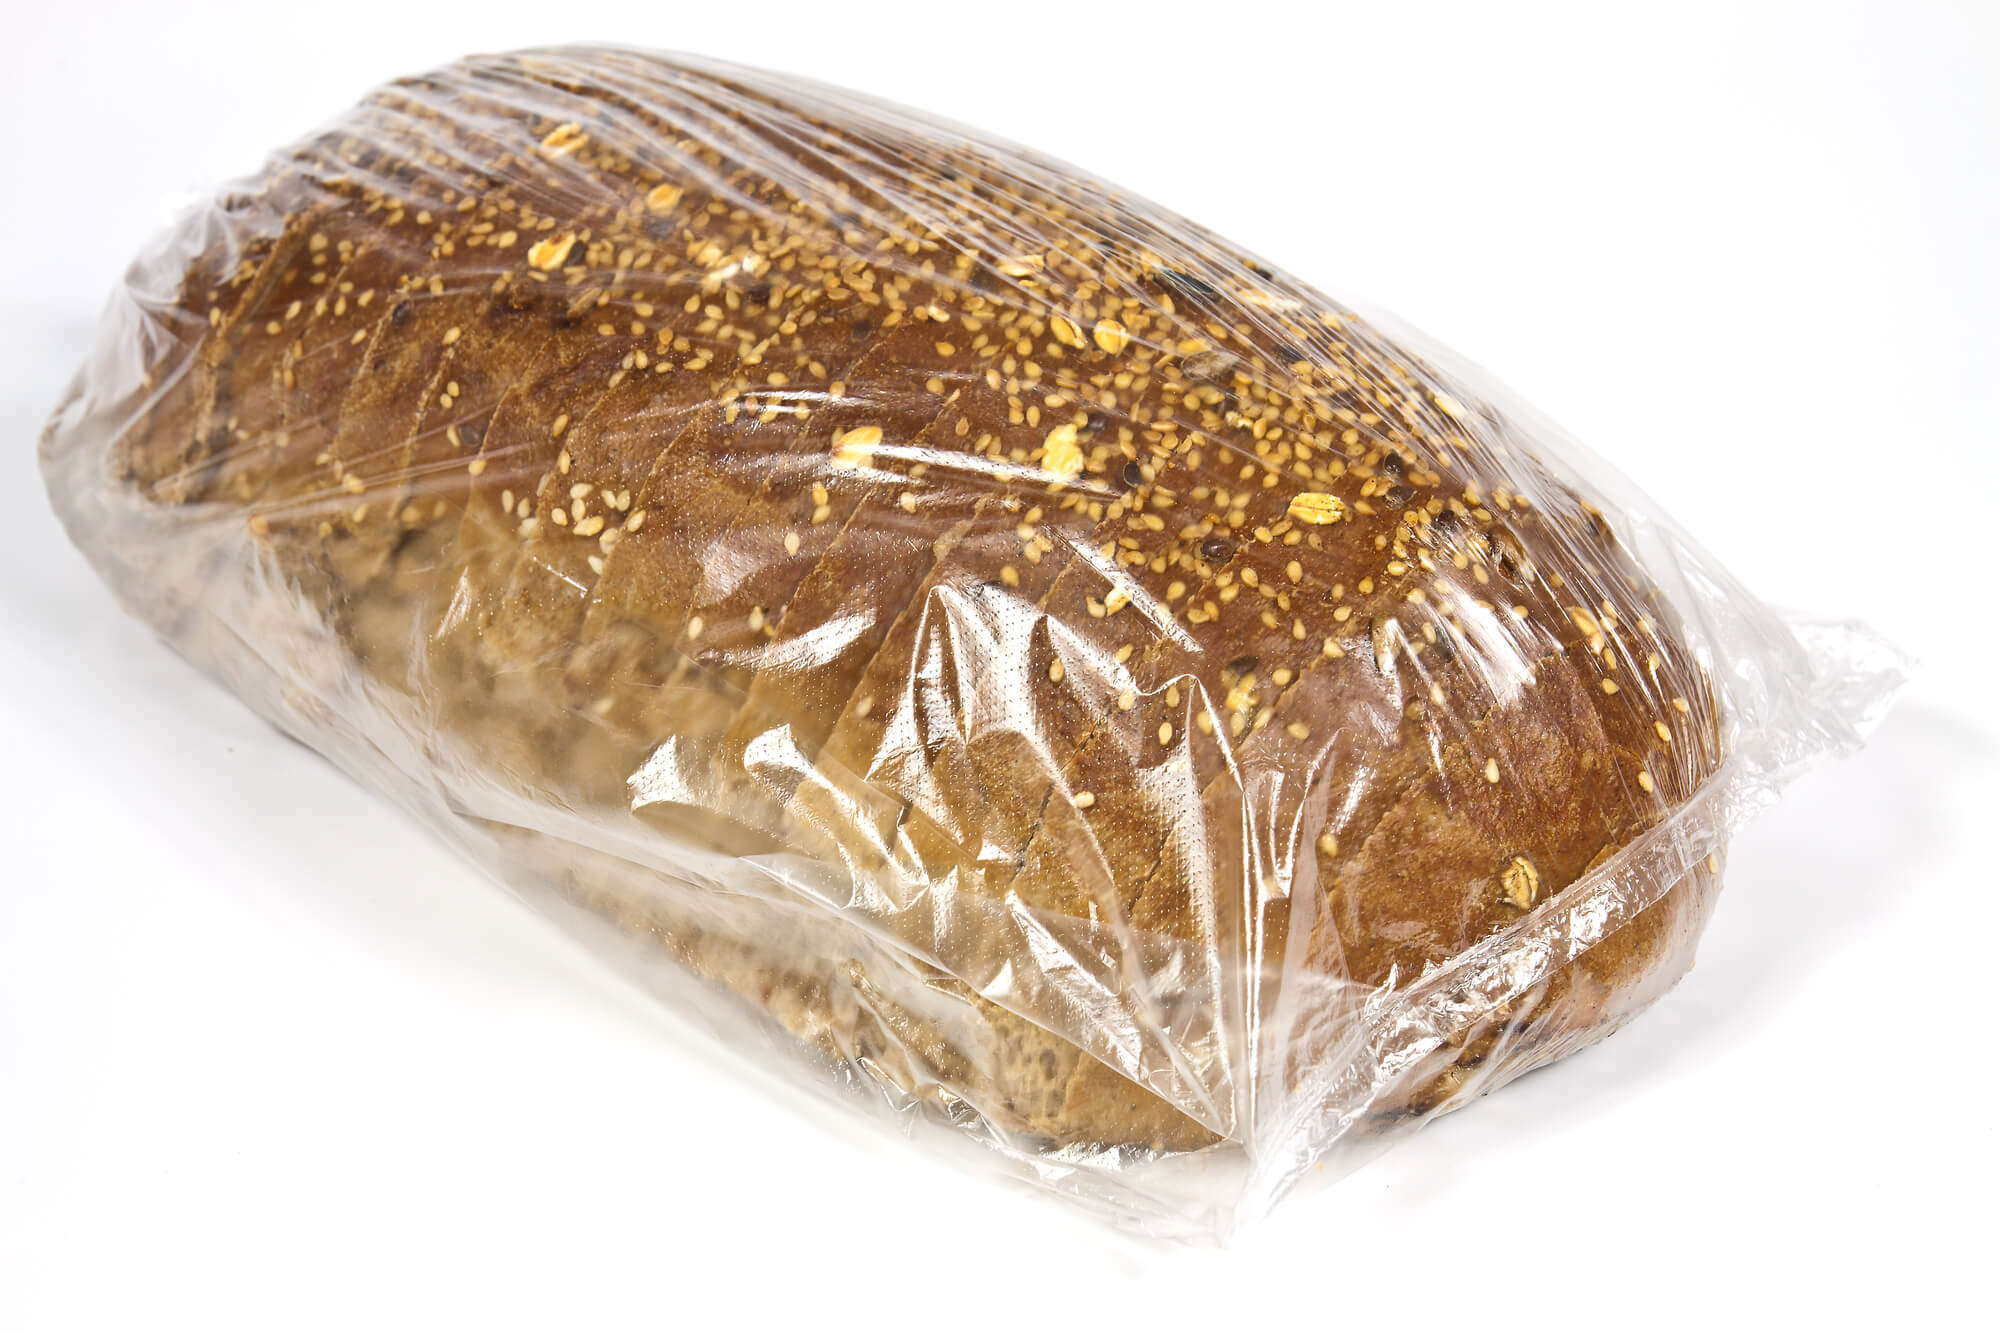 bags from bread and Bagel Packaging Equipment